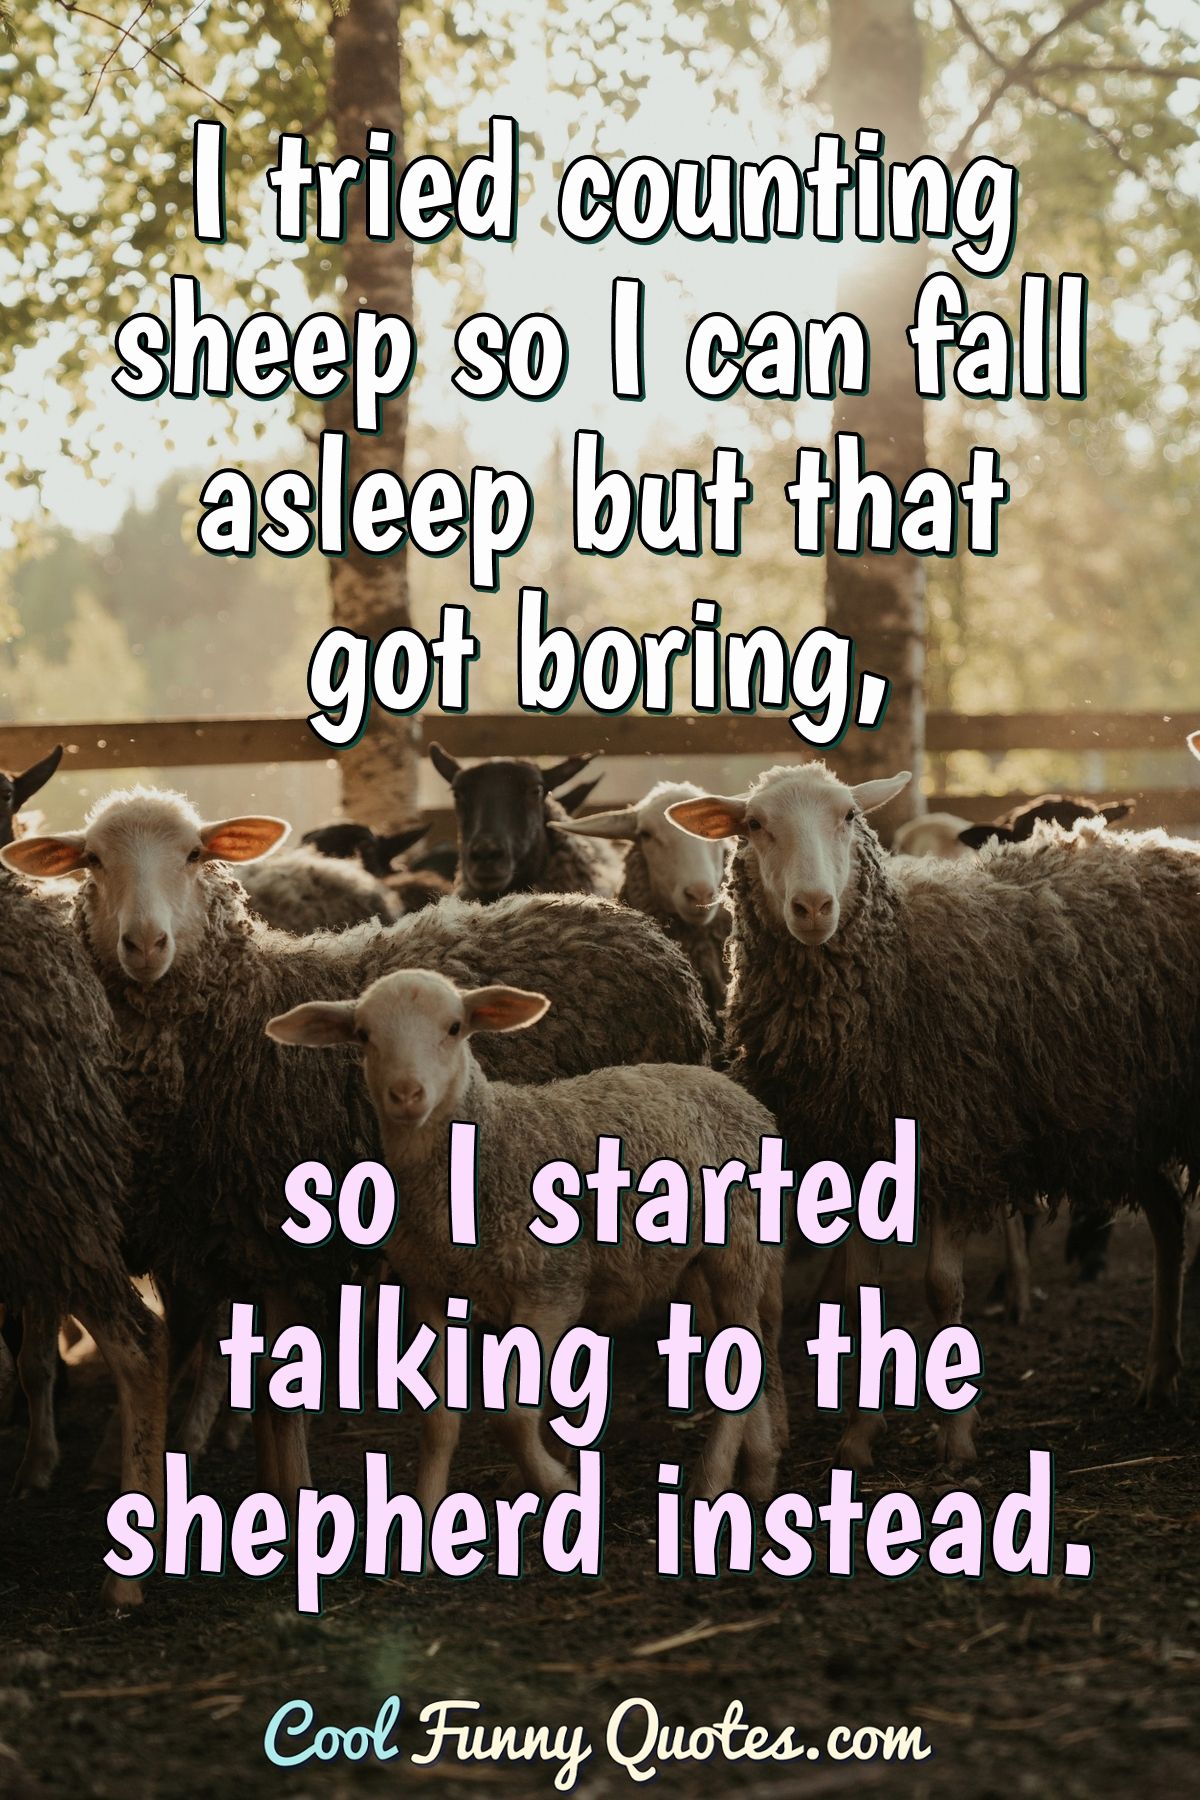 I tried counting sheep so I can fall asleep but that got boring, so I started talking to the shepherd instead. - Anonymous